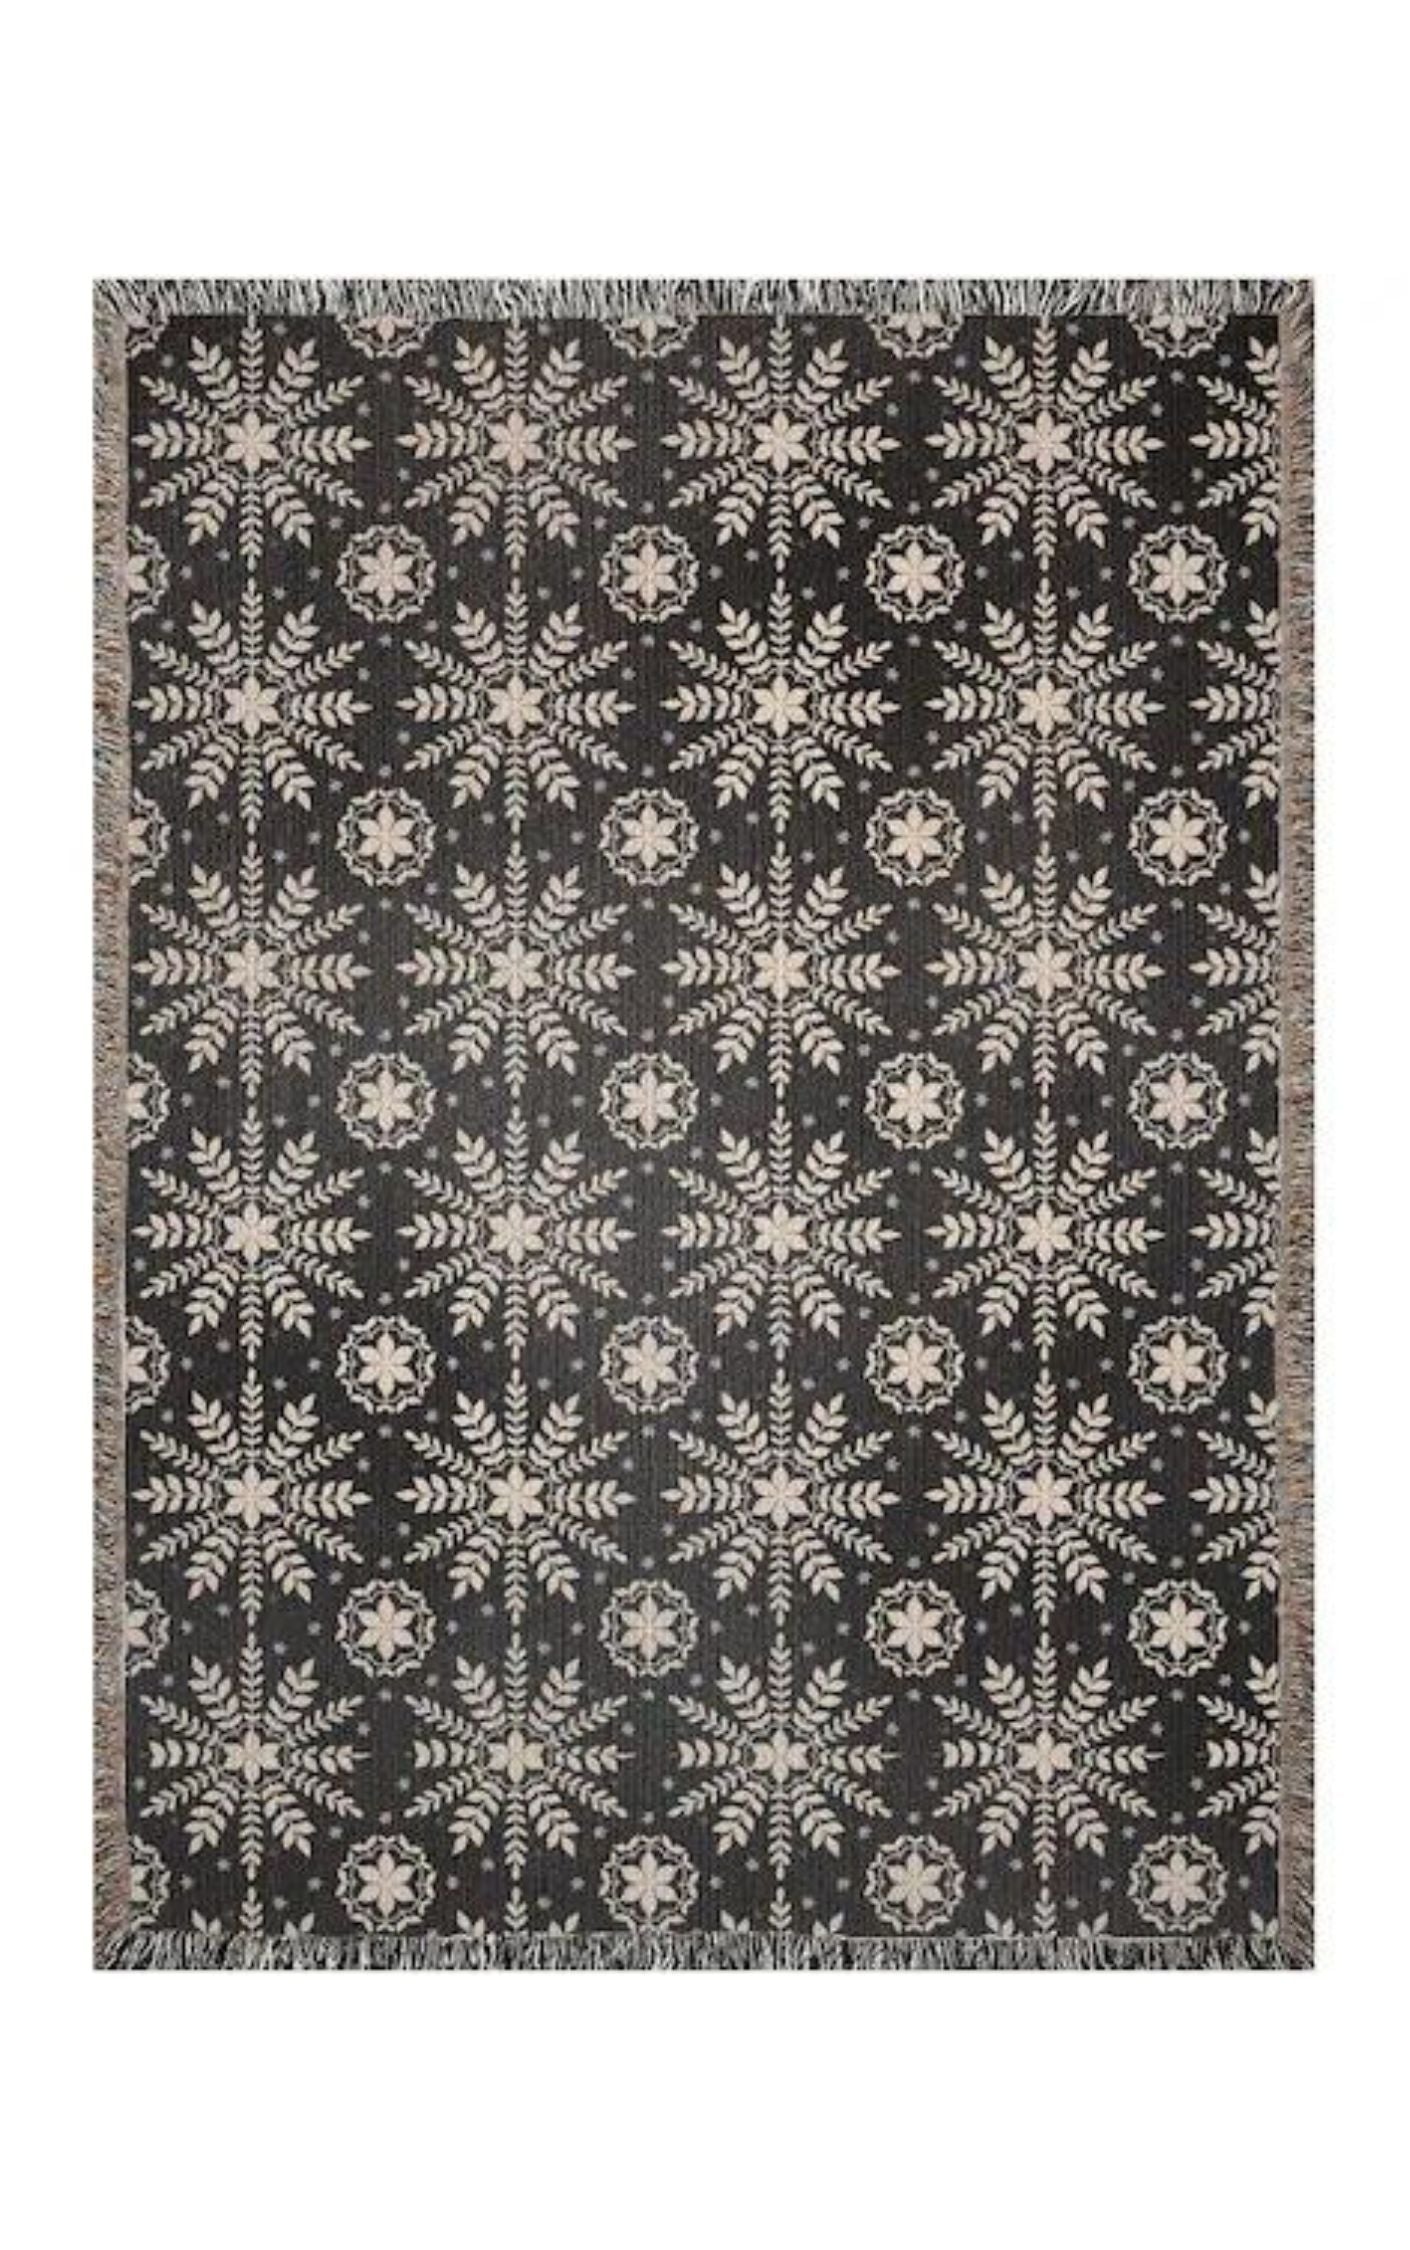 Black and beige snowflakes woven blanket 50x60” clearance